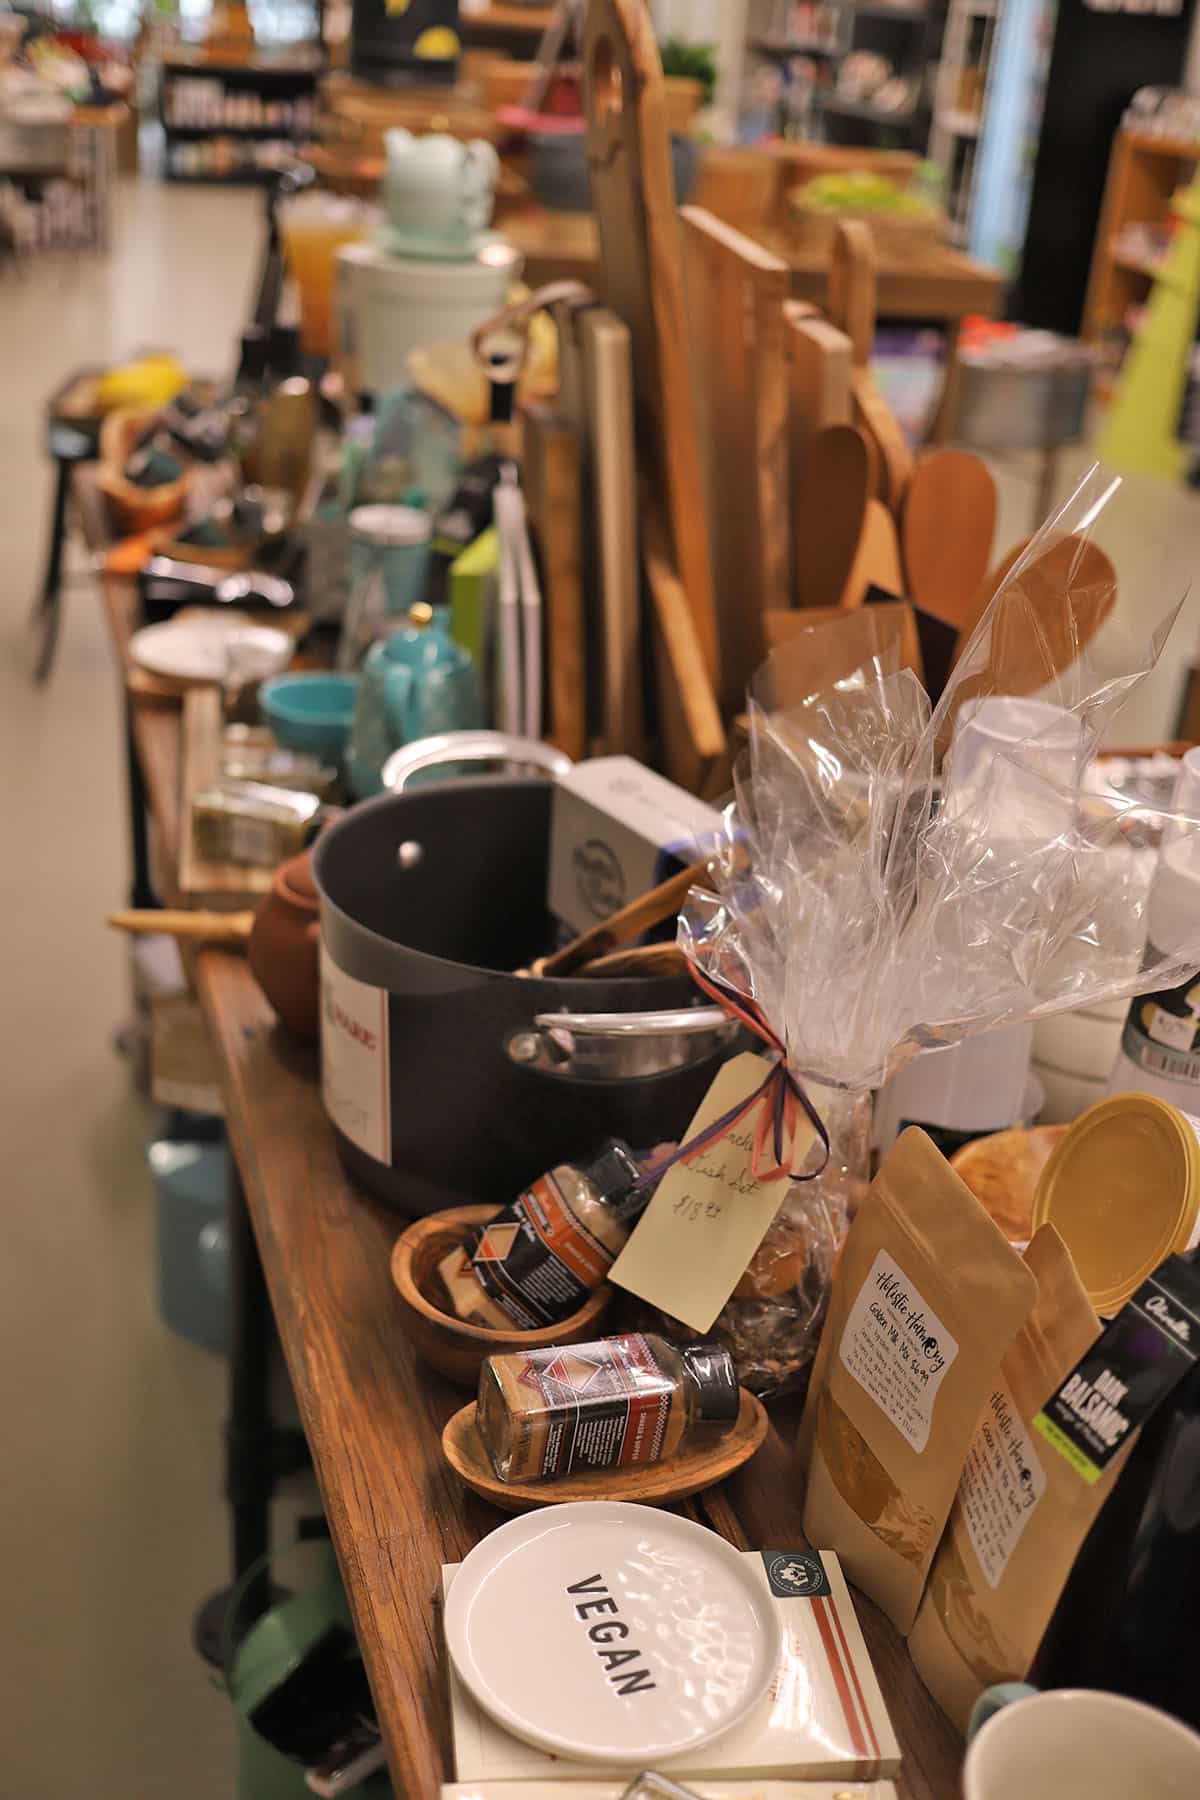 Kitchen goods on display at Simply Nourished.